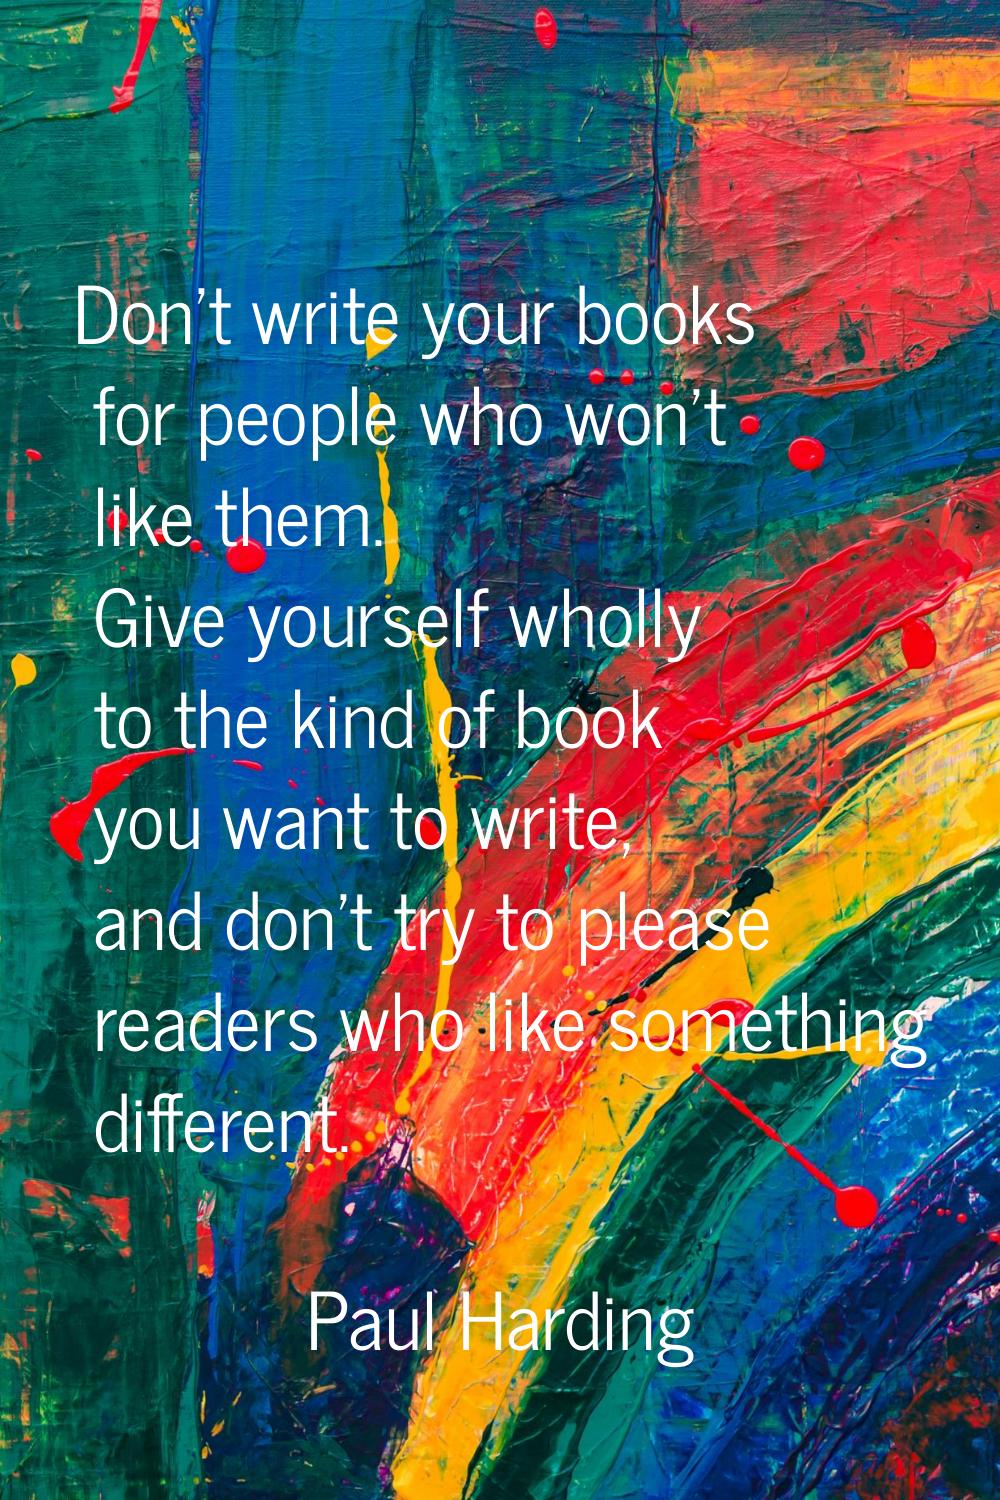 Don't write your books for people who won't like them. Give yourself wholly to the kind of book you